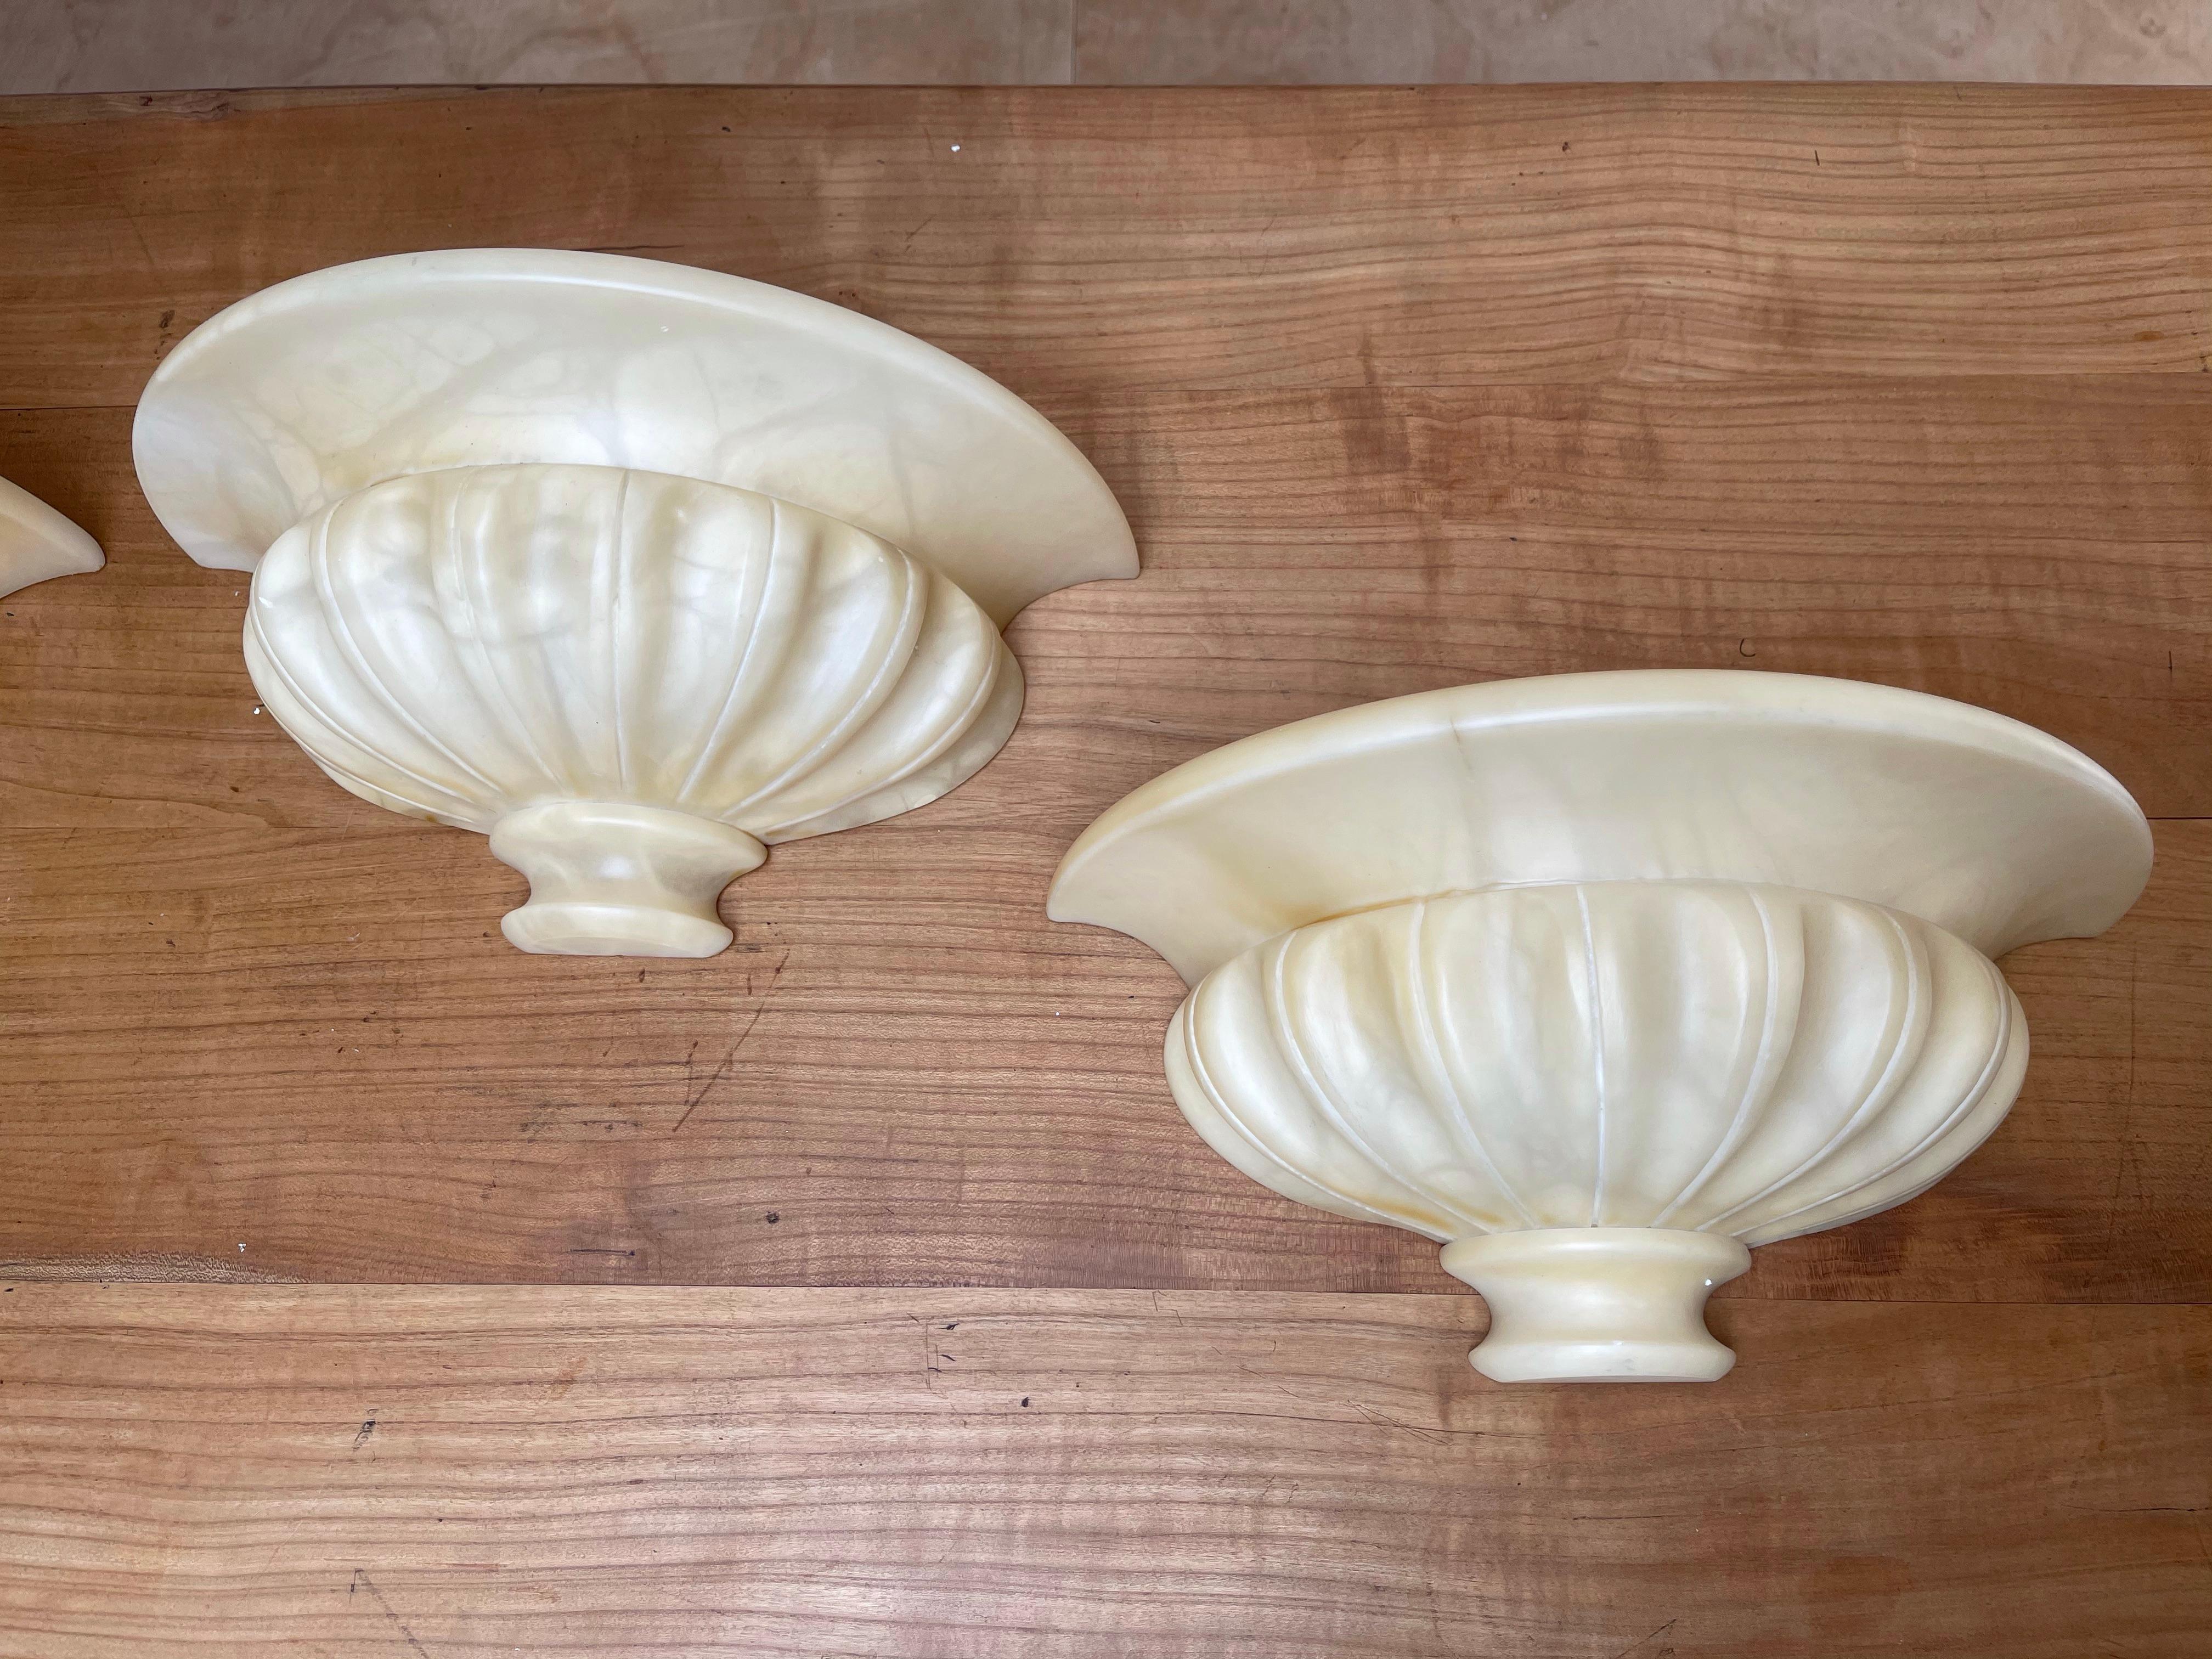 Wonderful group of 4 alabaster, classical design wall lamps.

These good size and great design wall sconces with warm light creating qualities are all in superb condition. There is something about the look and feel of these alabaster shades (with or